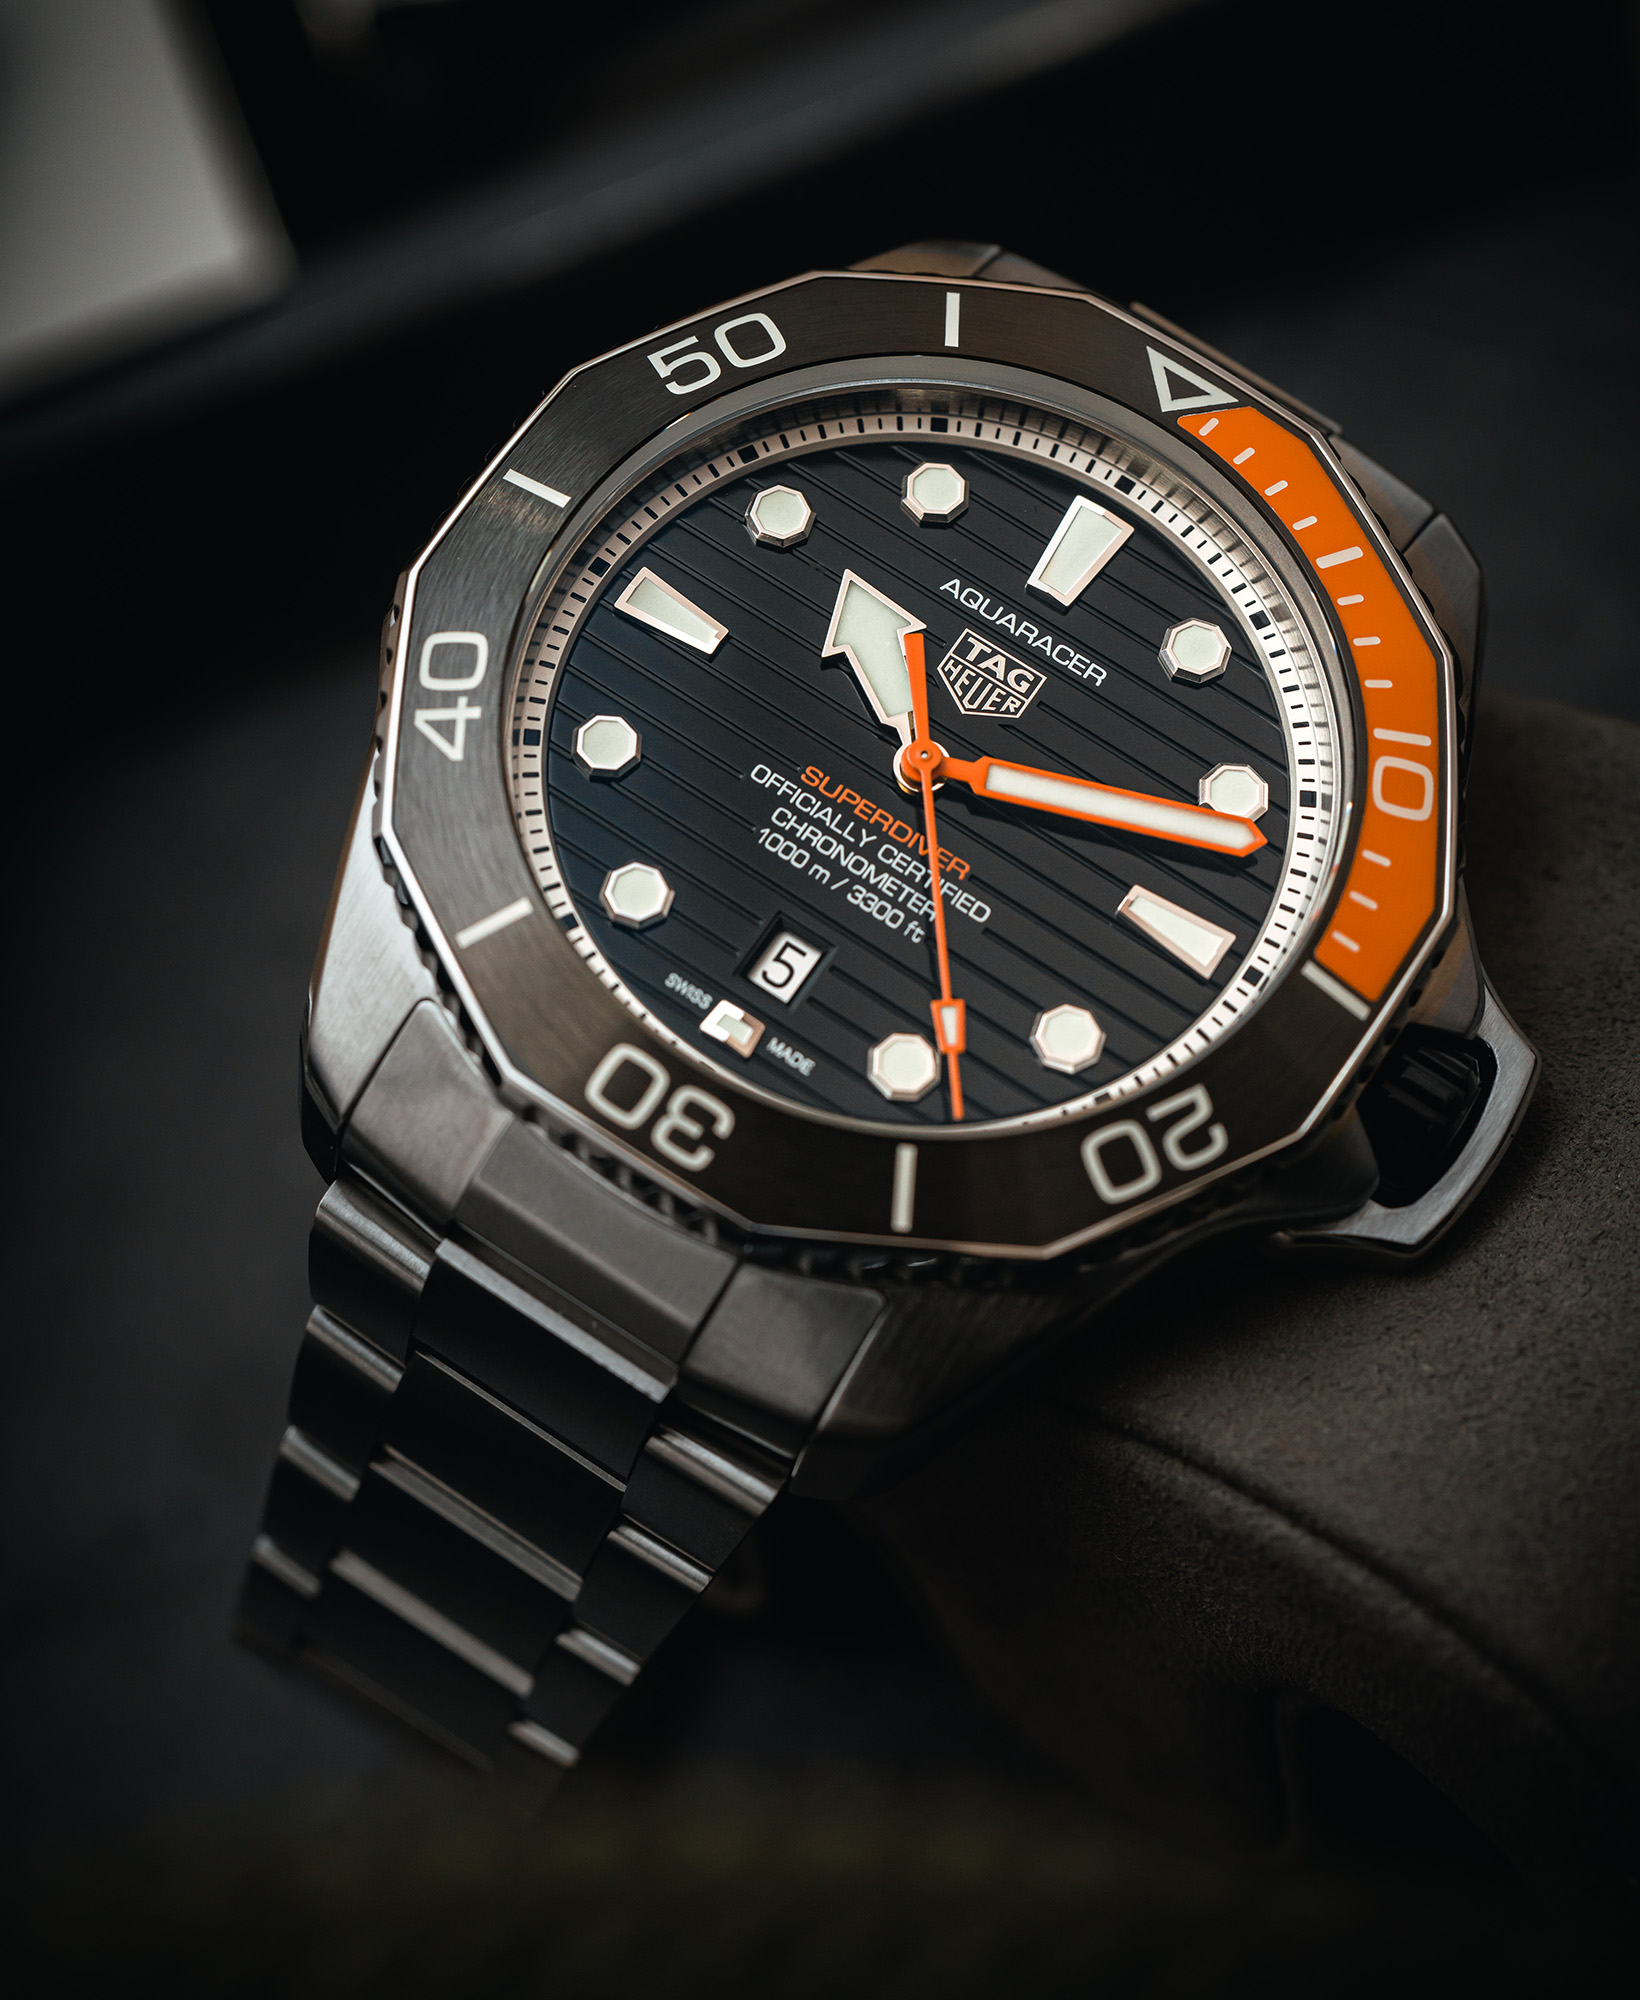 The Most Famous TAG Heuer Aquaracer Professional 1000 Superdiver Watch